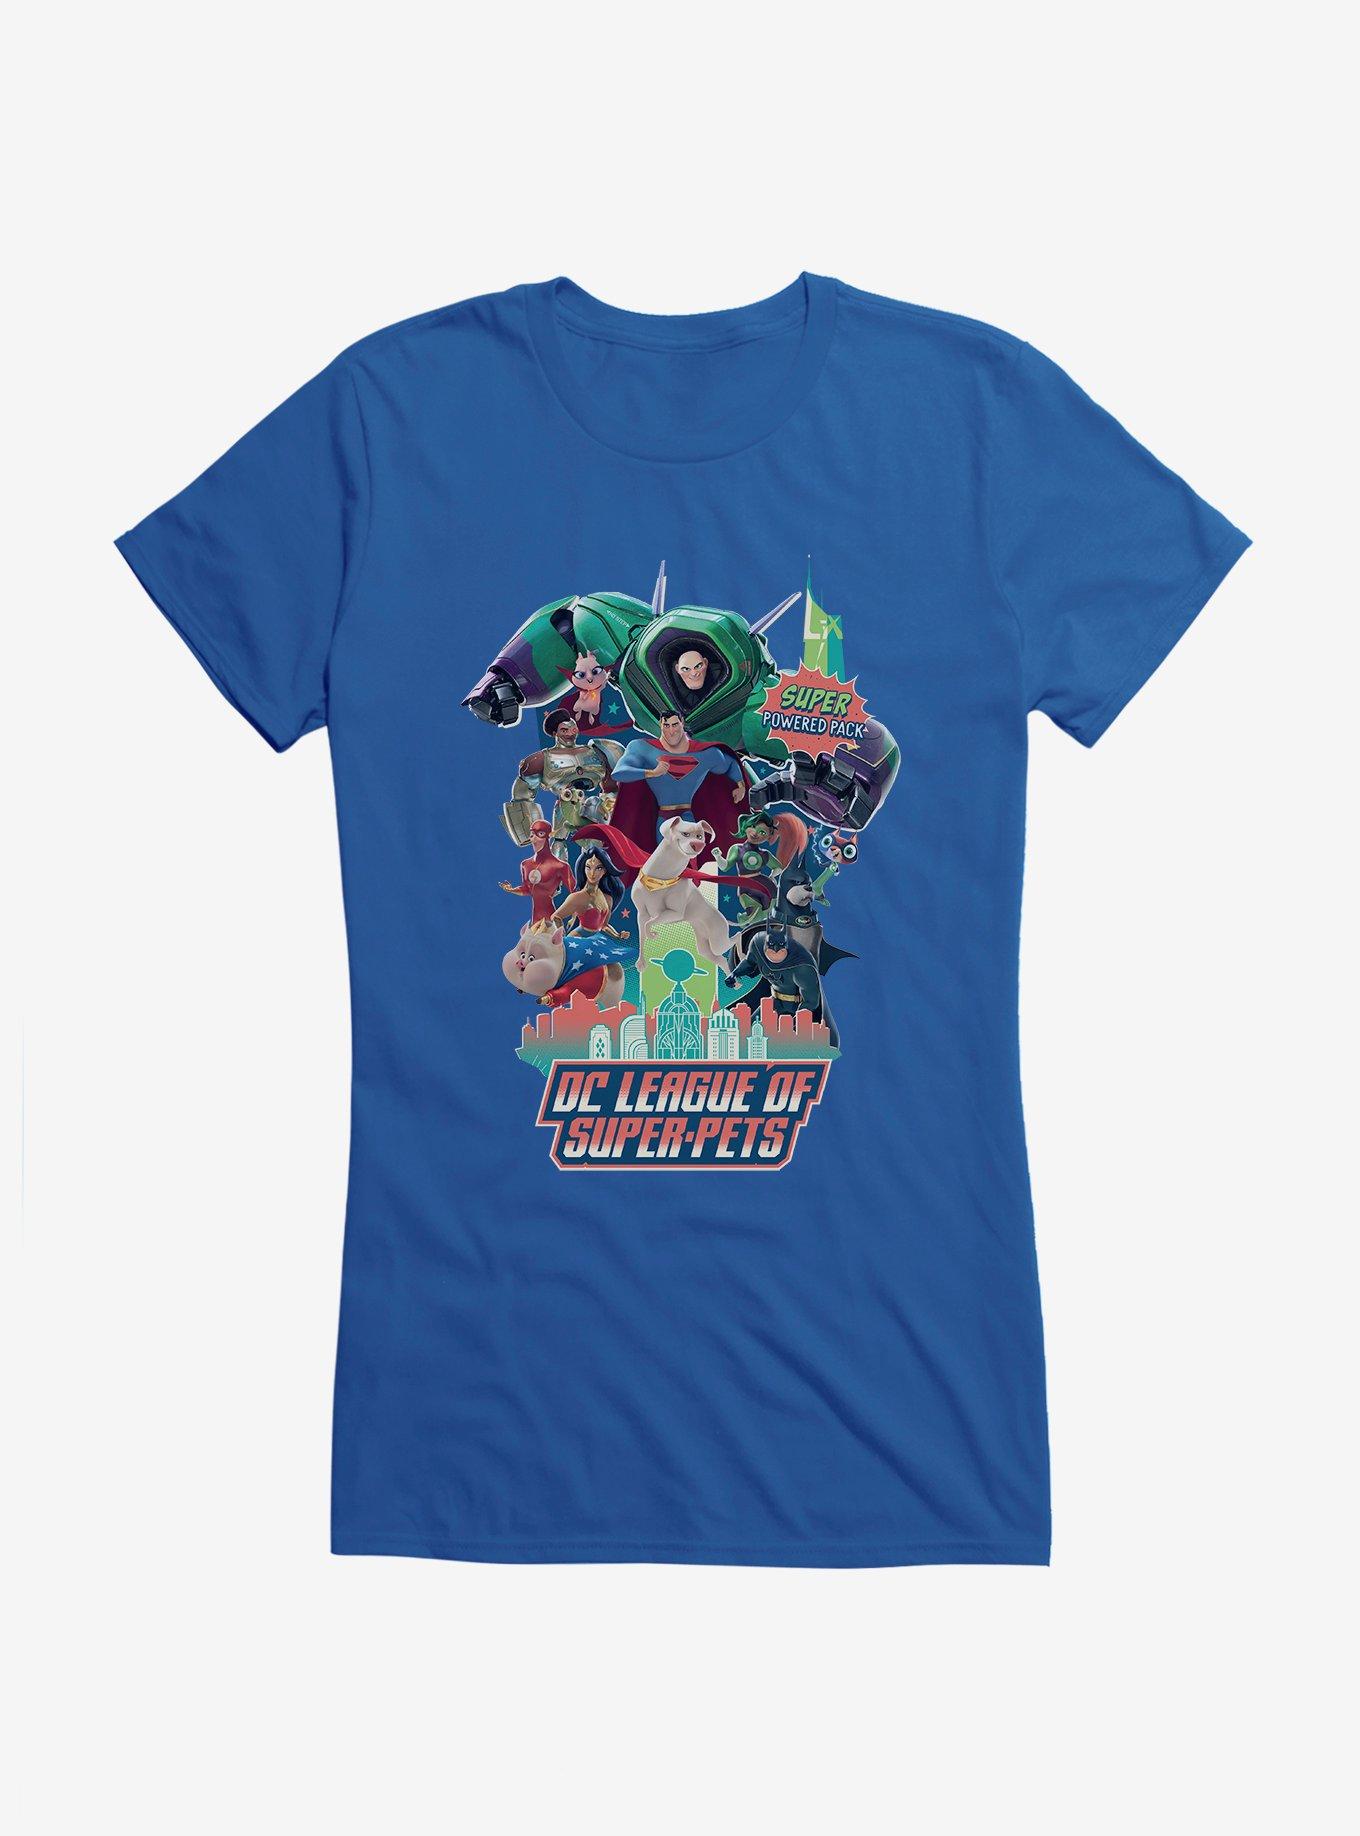 DC League of Super-Pets Super Powered Pack Comic Style Girls T-Shirt